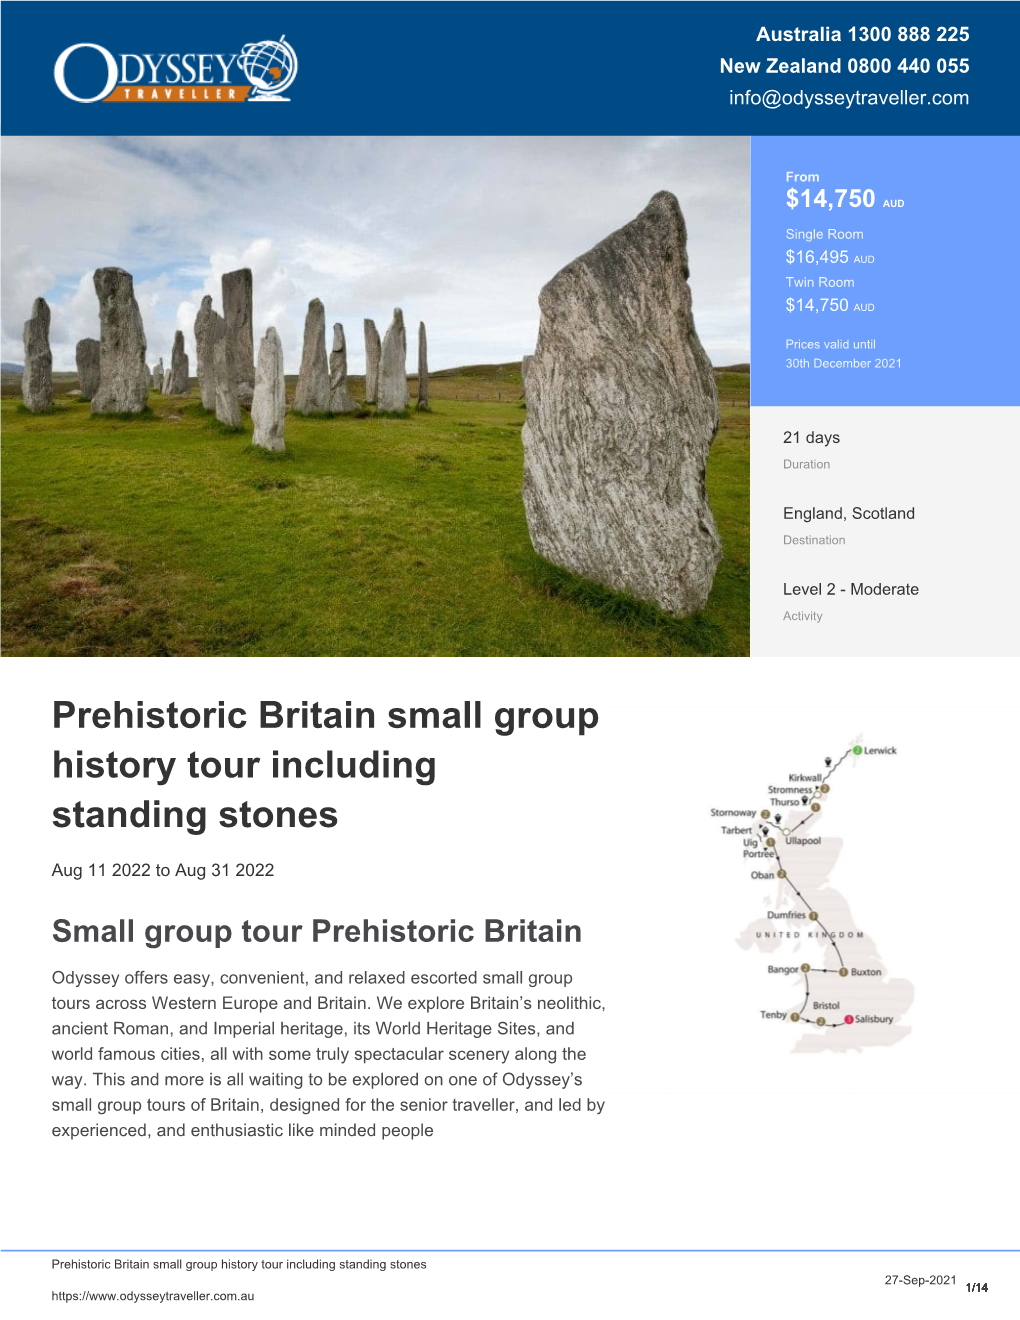 Prehistoric Britain Small Group Tour | Odyssey Traveller